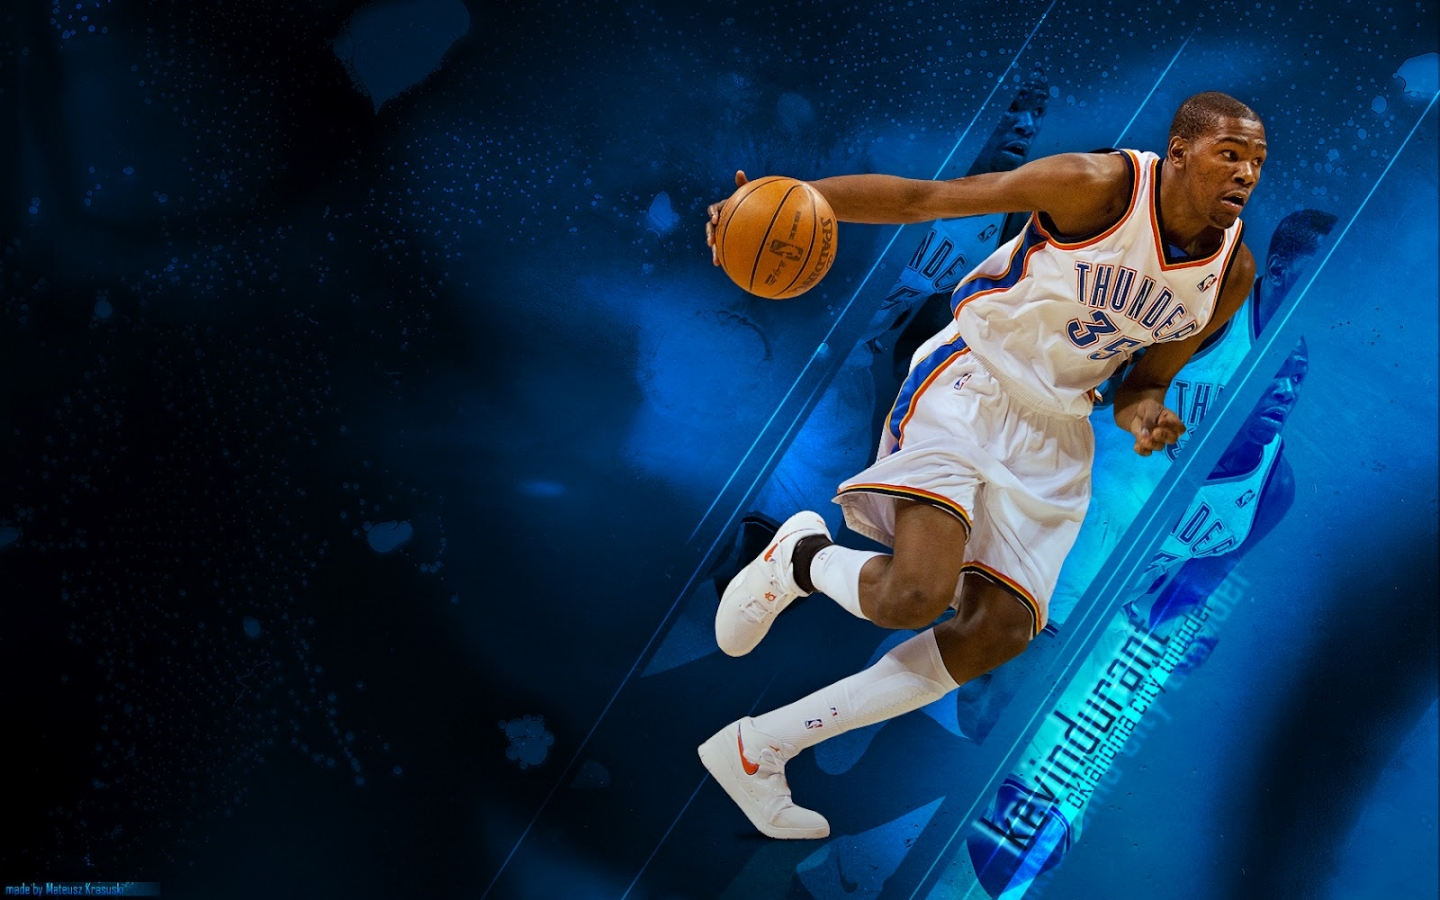 Free download oklahoma city thunder is a basketball team from the